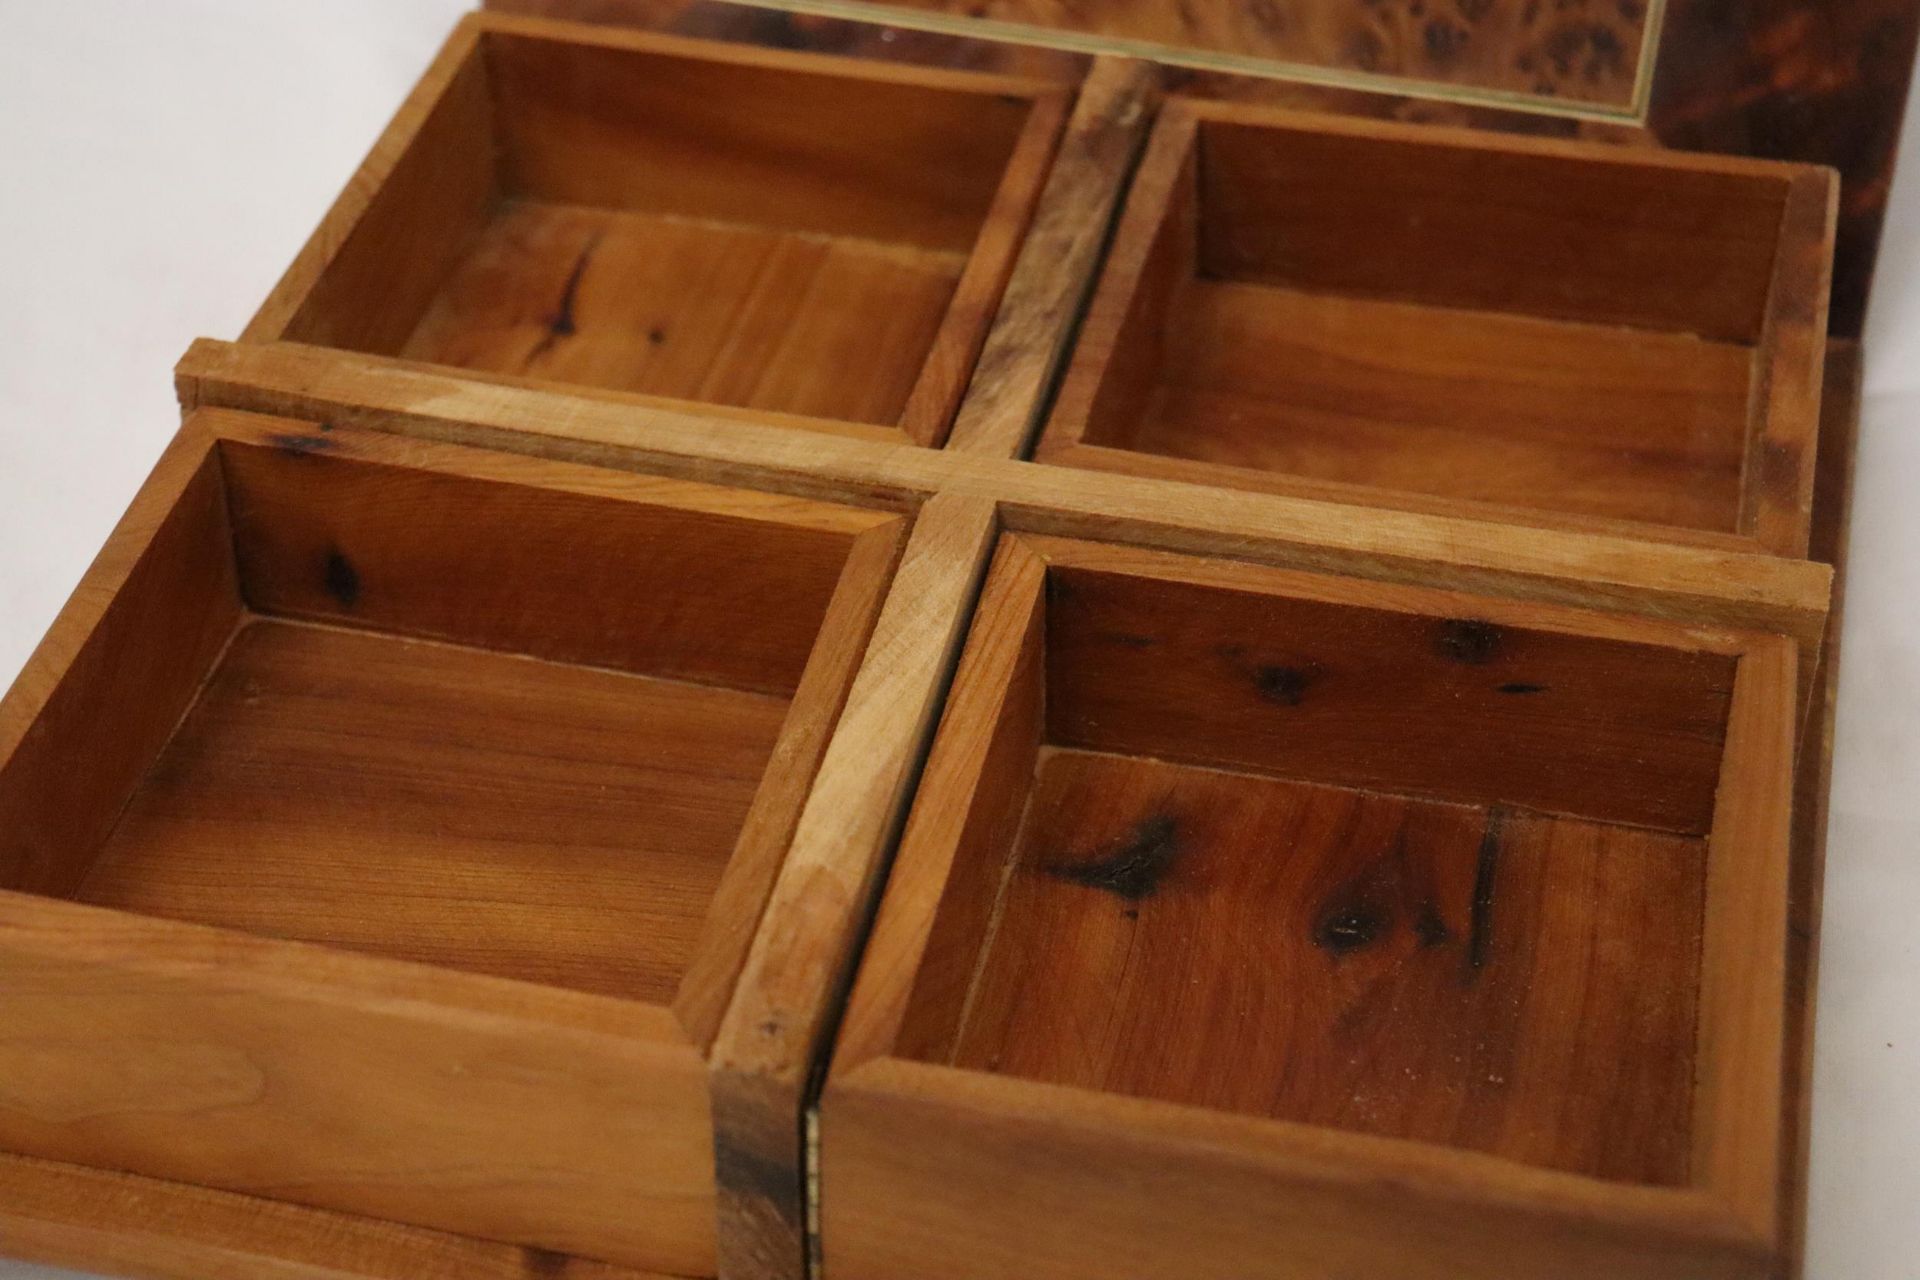 A THUYA WOODEN BOX WITH FOUR COMPARTMENTS TOGETHER WITH A WOODEN DESK TIDY AND PUZZLE BOX - Image 4 of 8